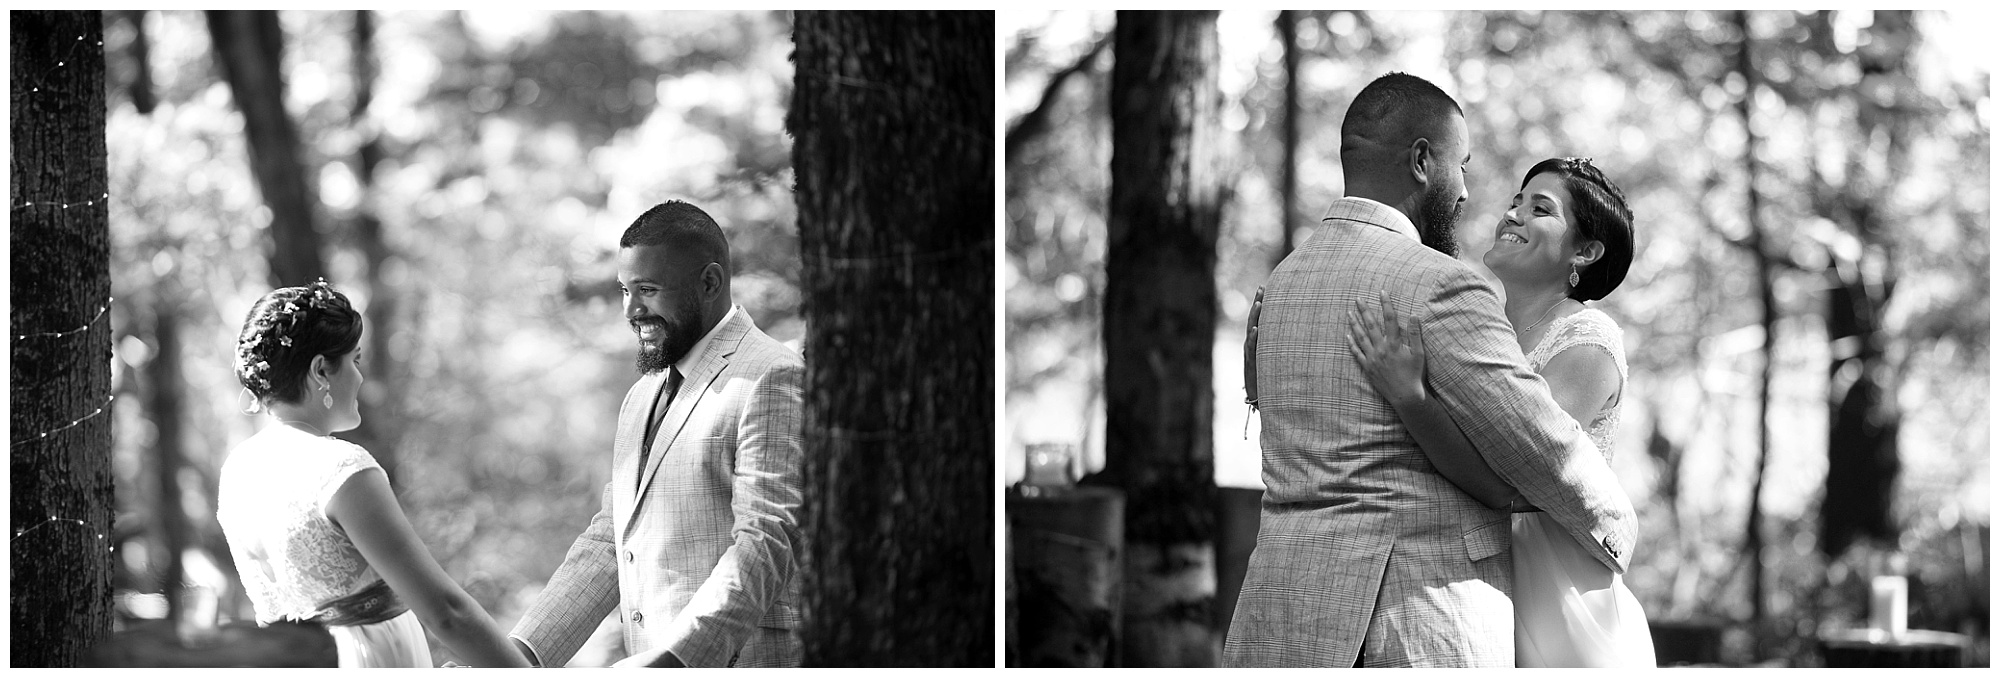 photos of a bride and groom's first look prior to ceremony.